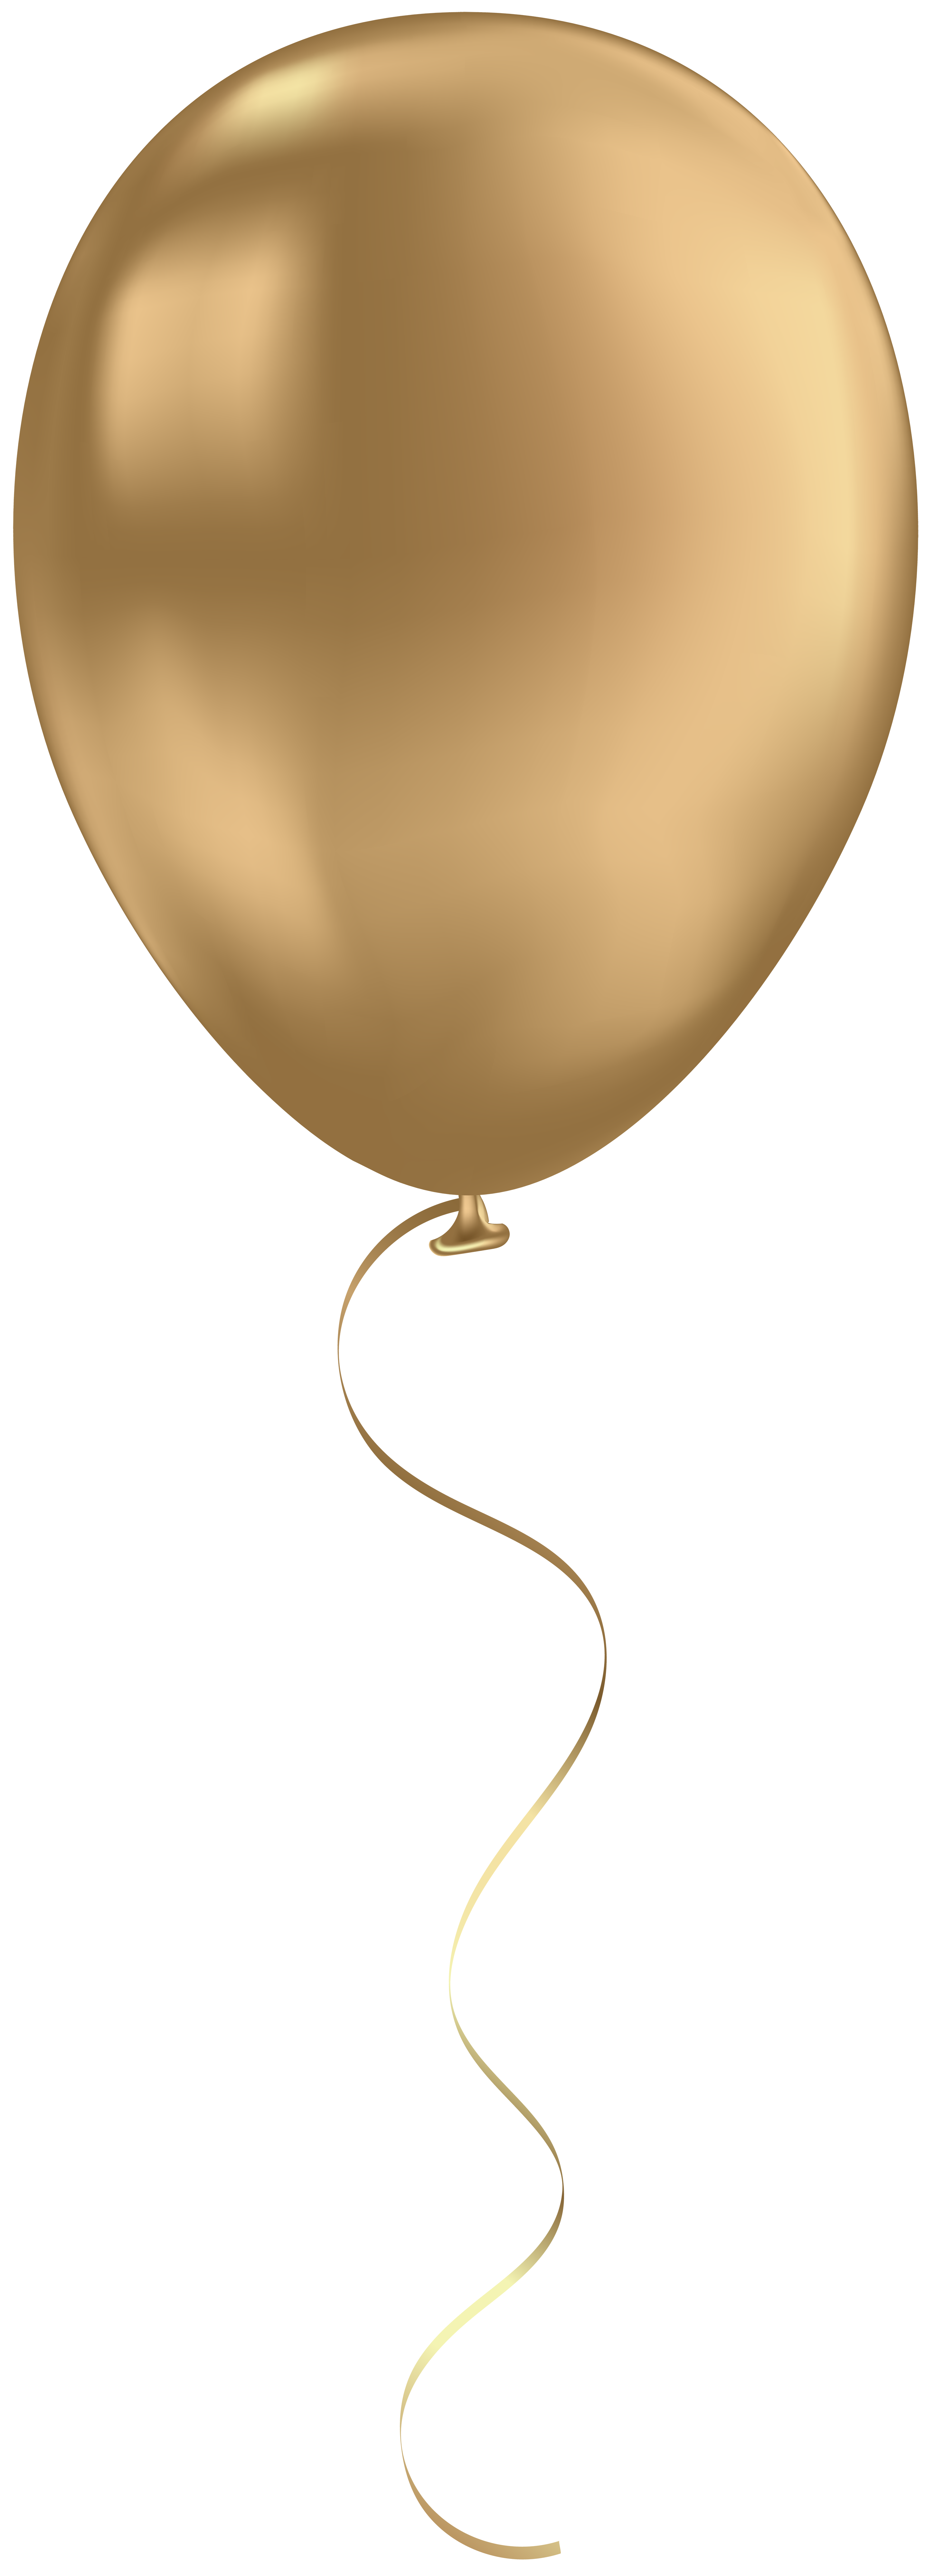 Balloon Gold PNG Clip Art Image | Gallery Yopriceville - High-Quality ...